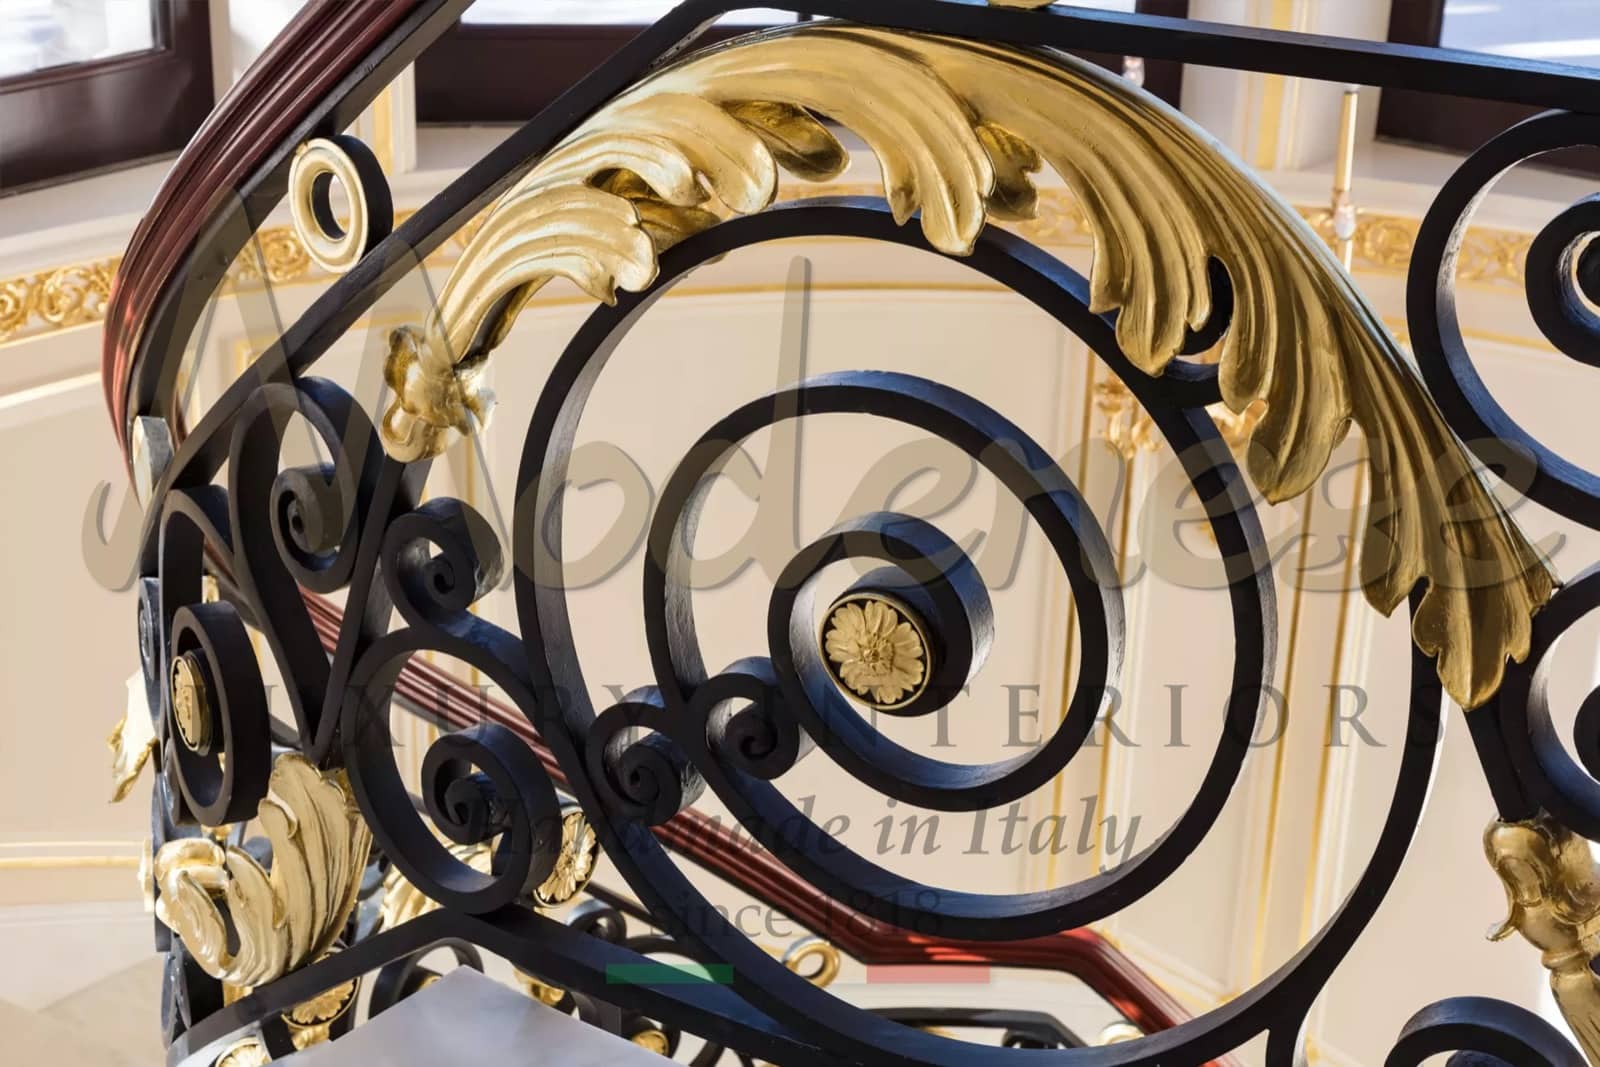 gold leaf application attention to details iron wrought railing best interior design studio ideas baroque luxury classic made in Italy interiors classy projects baroque rococo empire